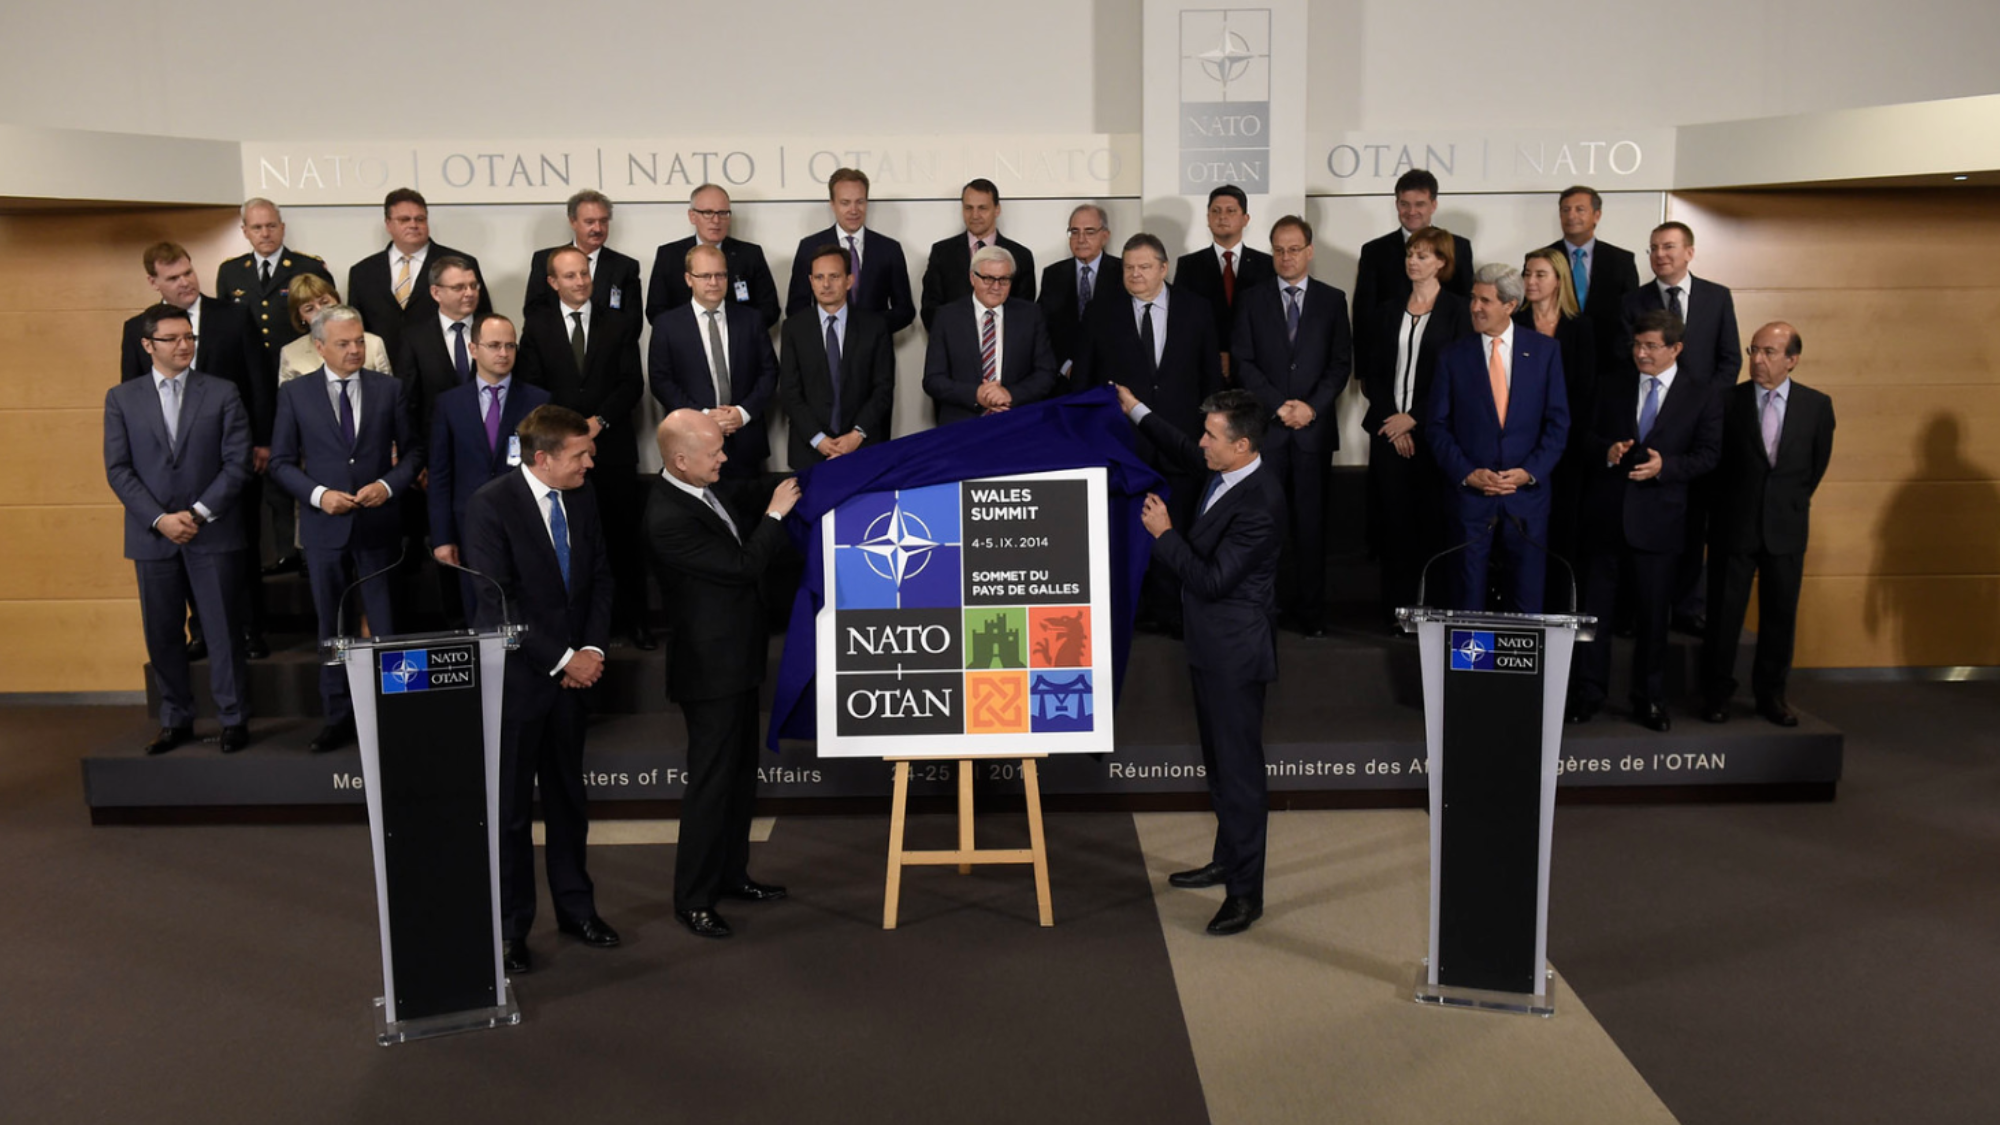 Leaders of NATO countries stand on a stage and look on as the Secretaries of State from the UK and Wales unveil the logo of the 2014 NATO Summit in Wales.